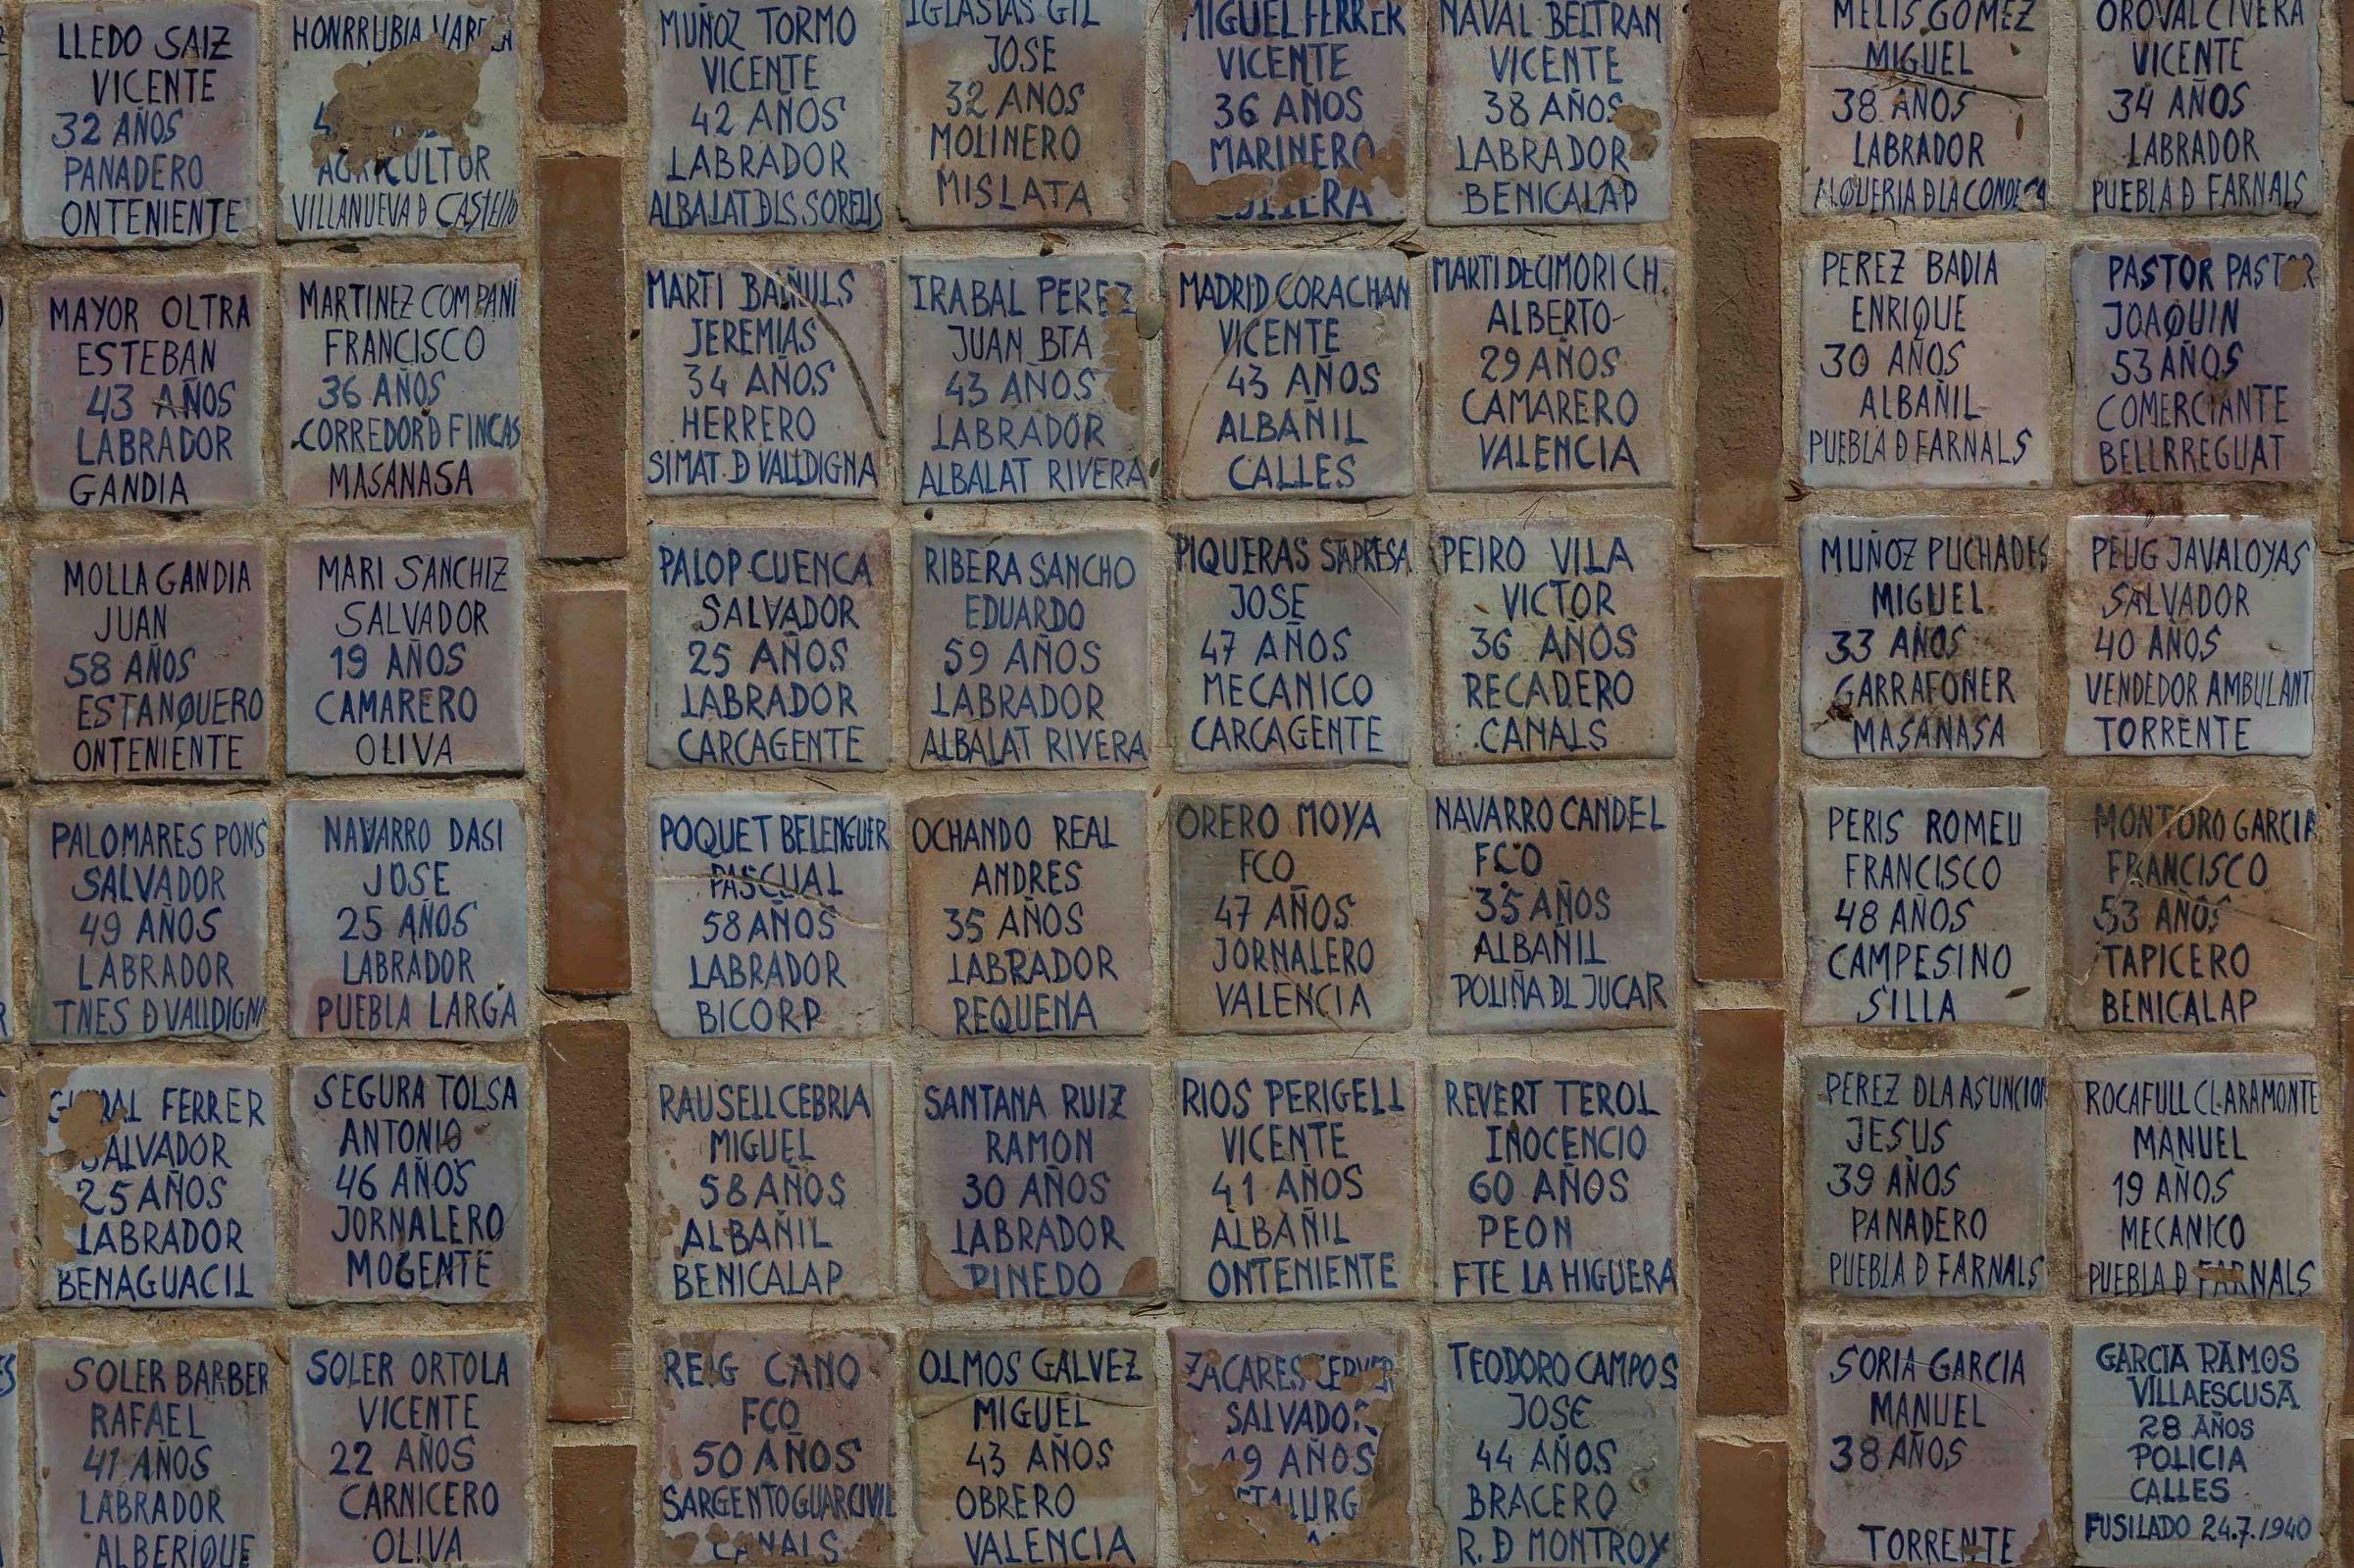 the end of oblivion - Tiles with the names, age and profession of the missing...